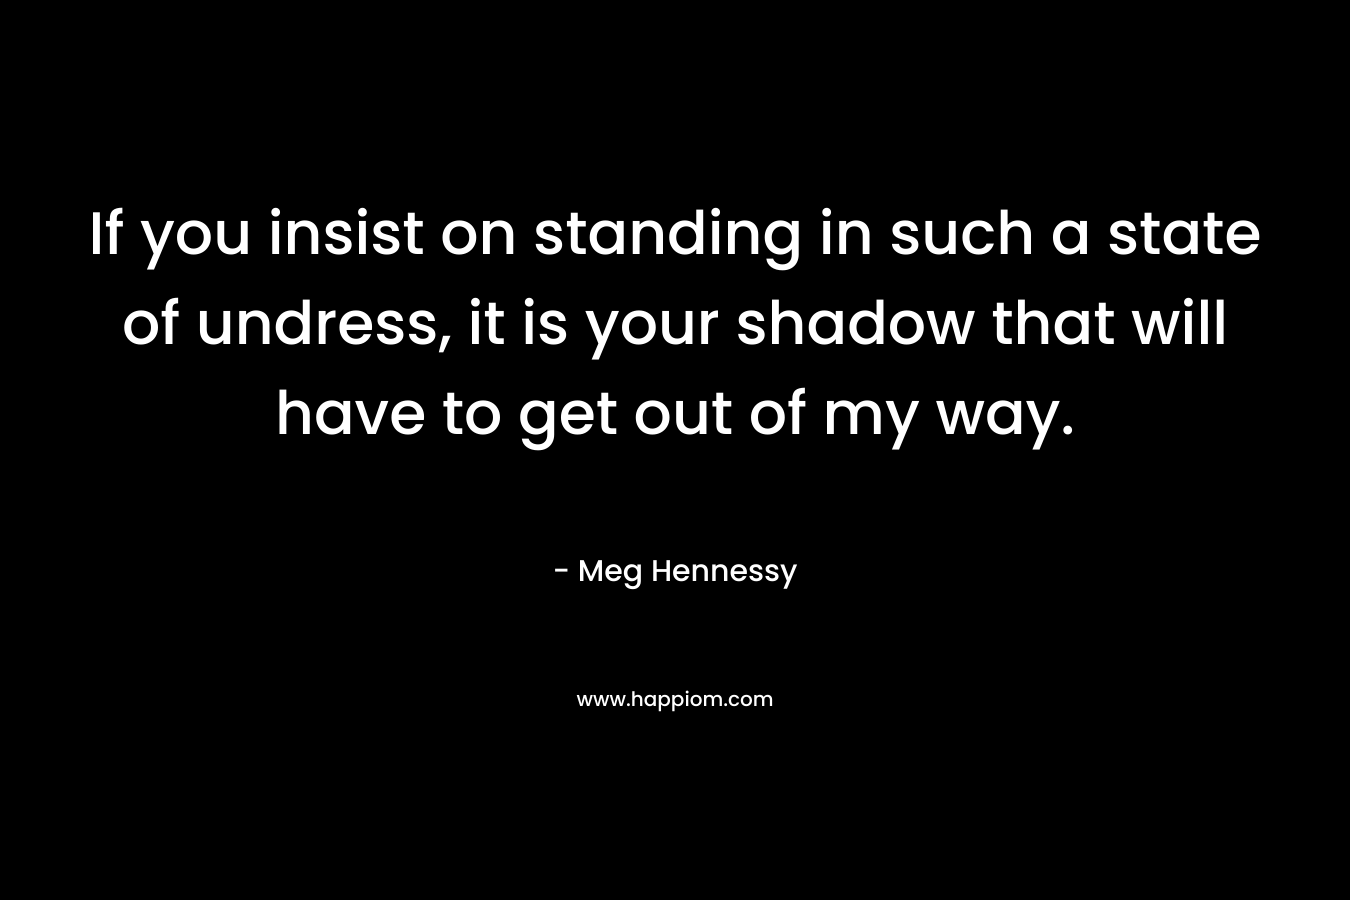 If you insist on standing in such a state of undress, it is your shadow that will have to get out of my way. – Meg Hennessy